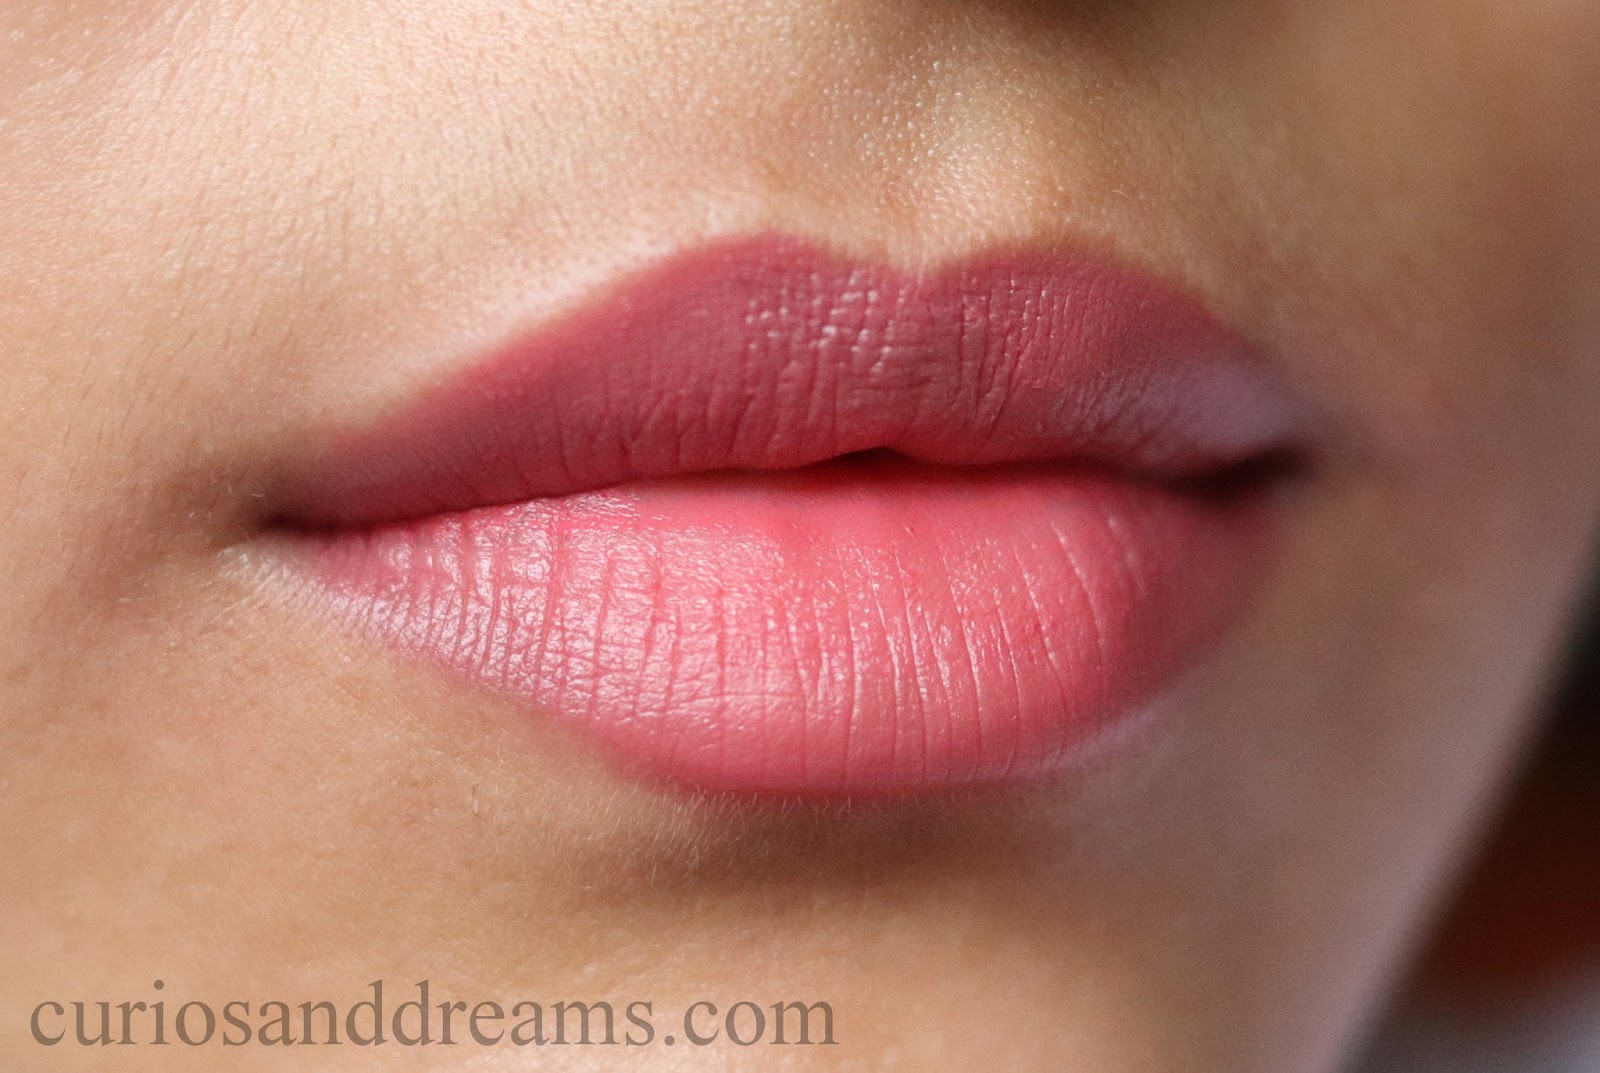 Curios and Dreams | Makeup and Beauty Blog: NYX Soft Matte ...